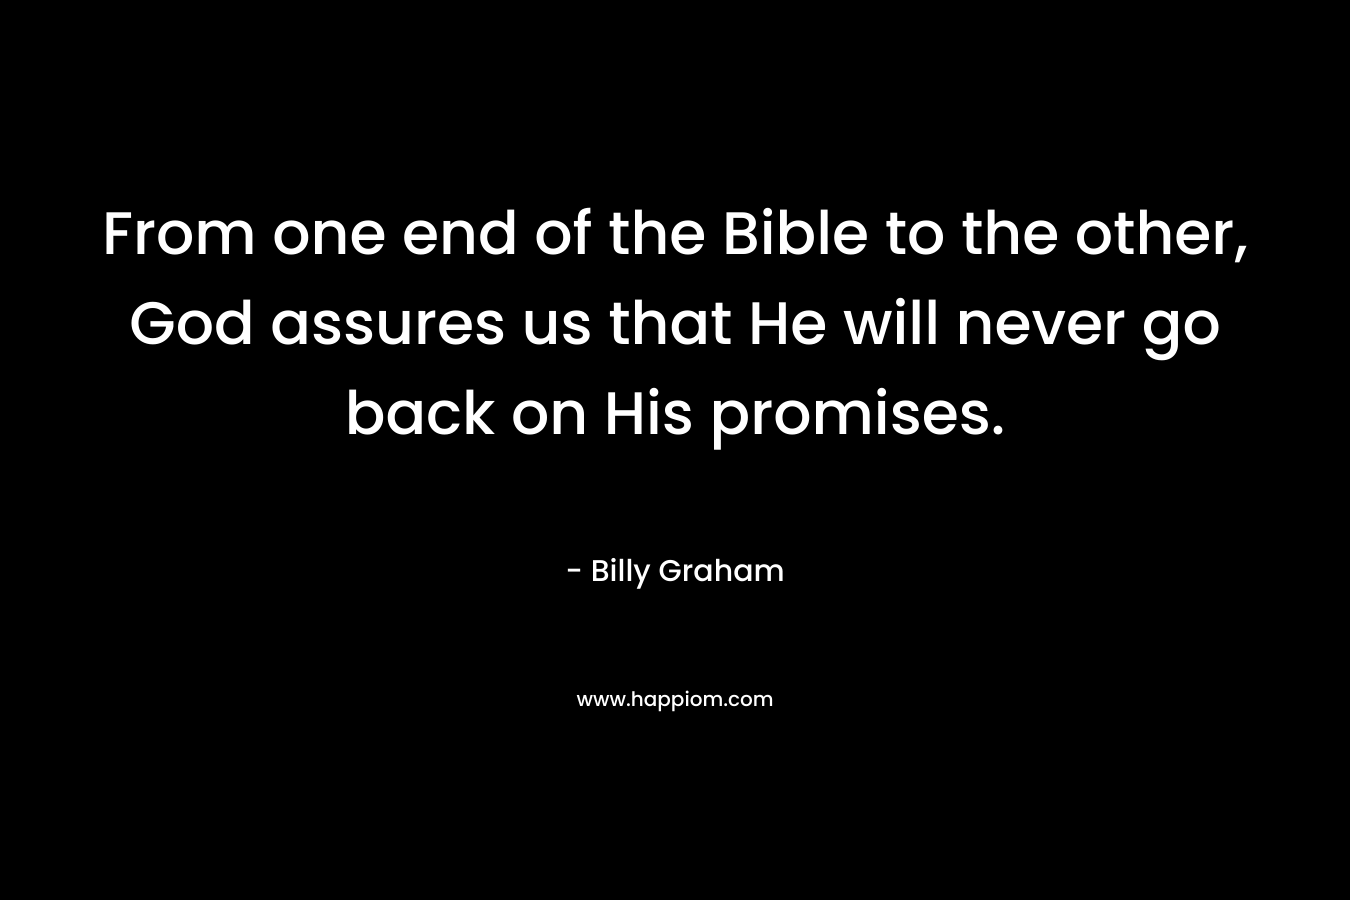 From one end of the Bible to the other, God assures us that He will never go back on His promises. – Billy Graham